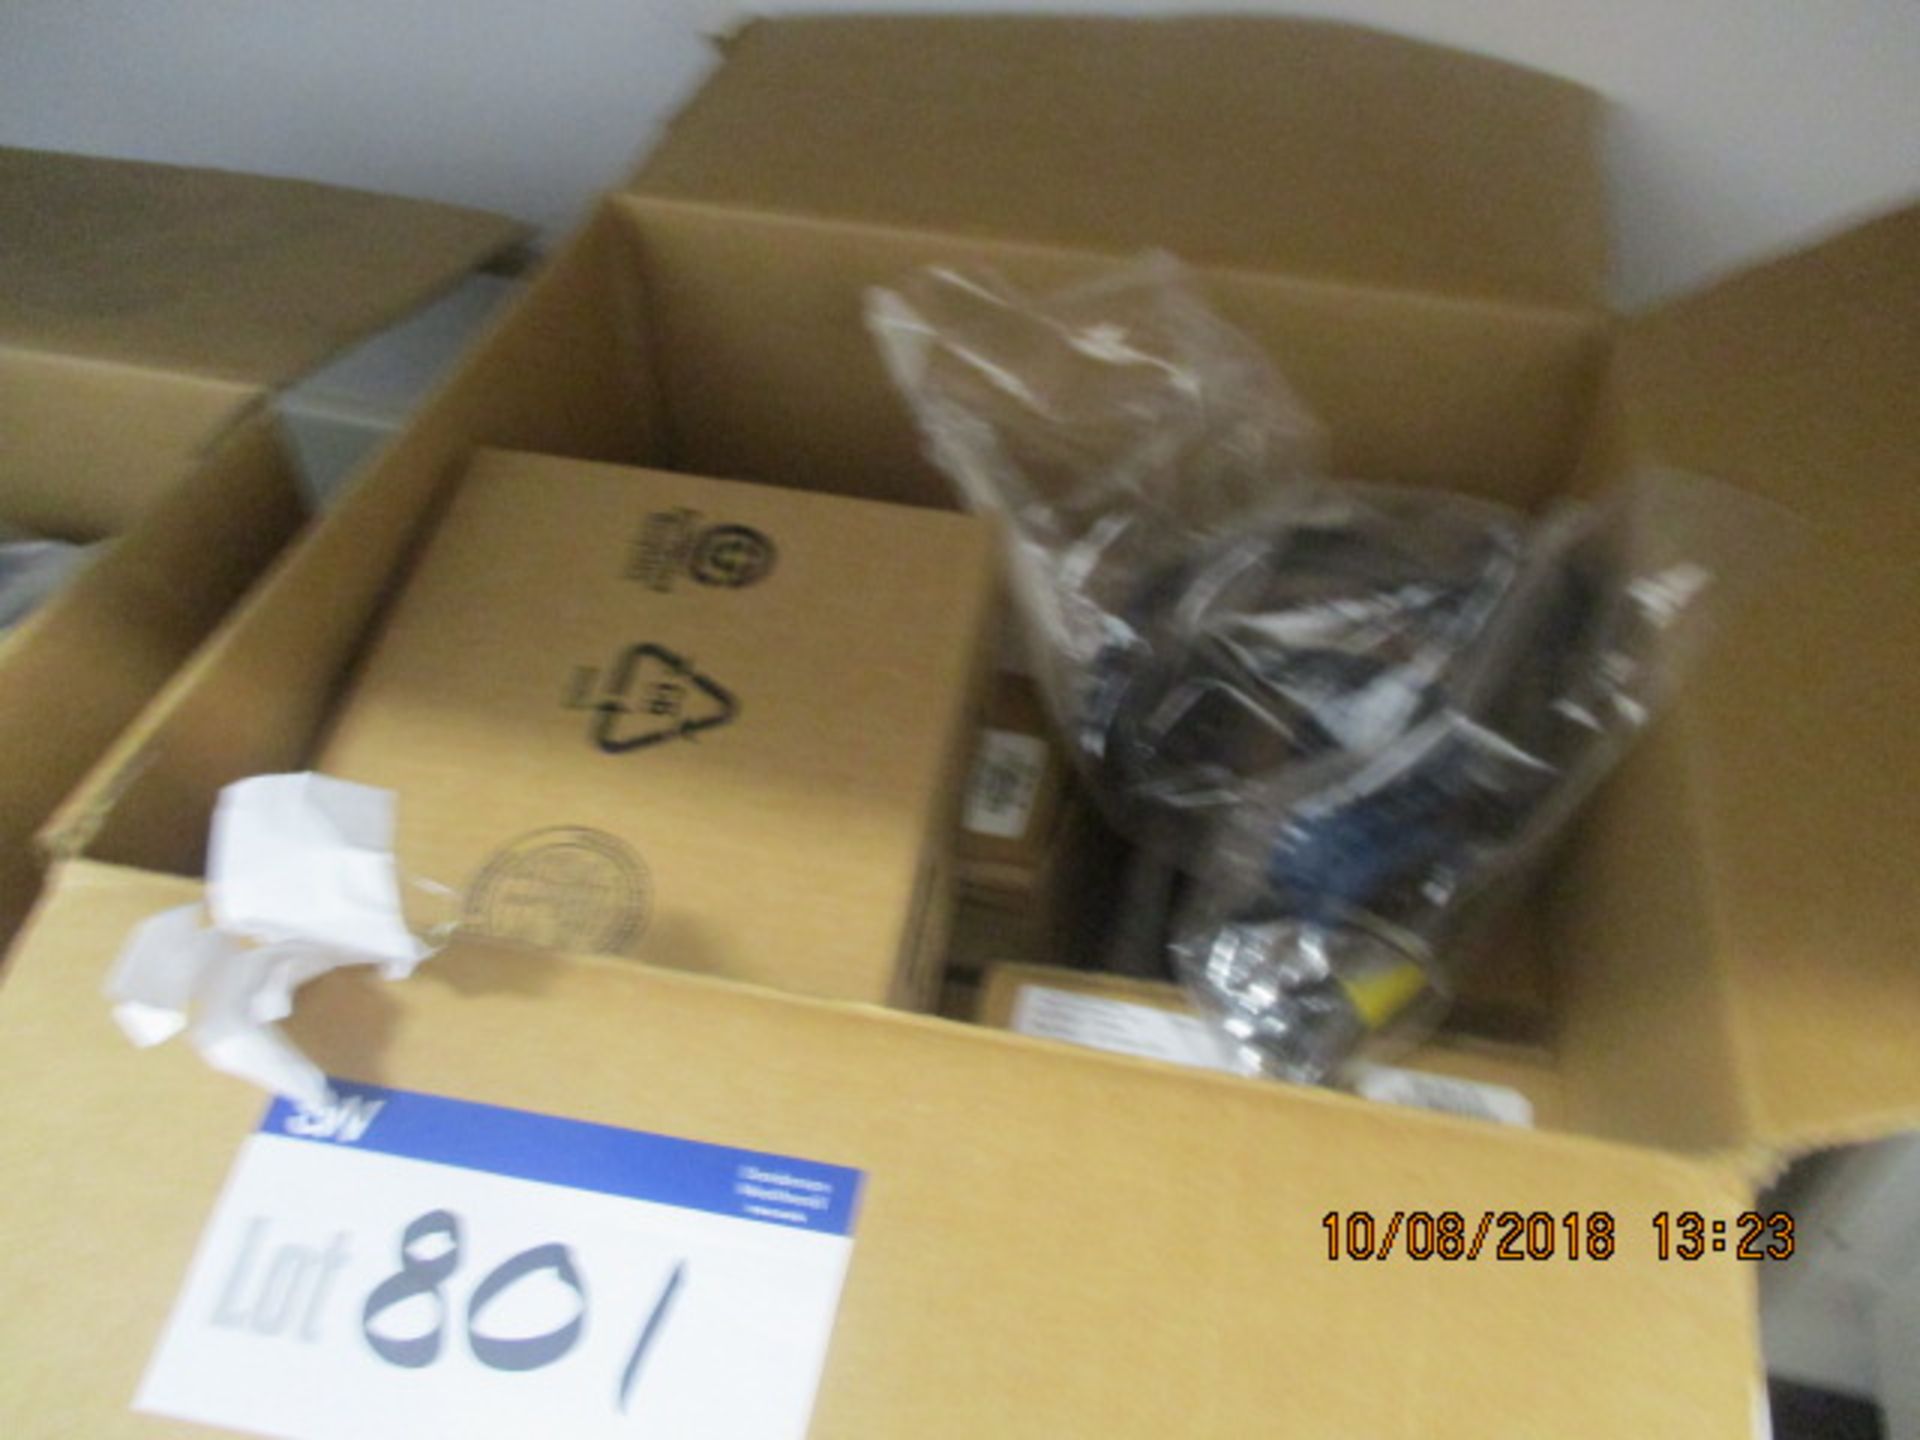 Quantity of Headsets, as set out in box (Unused)